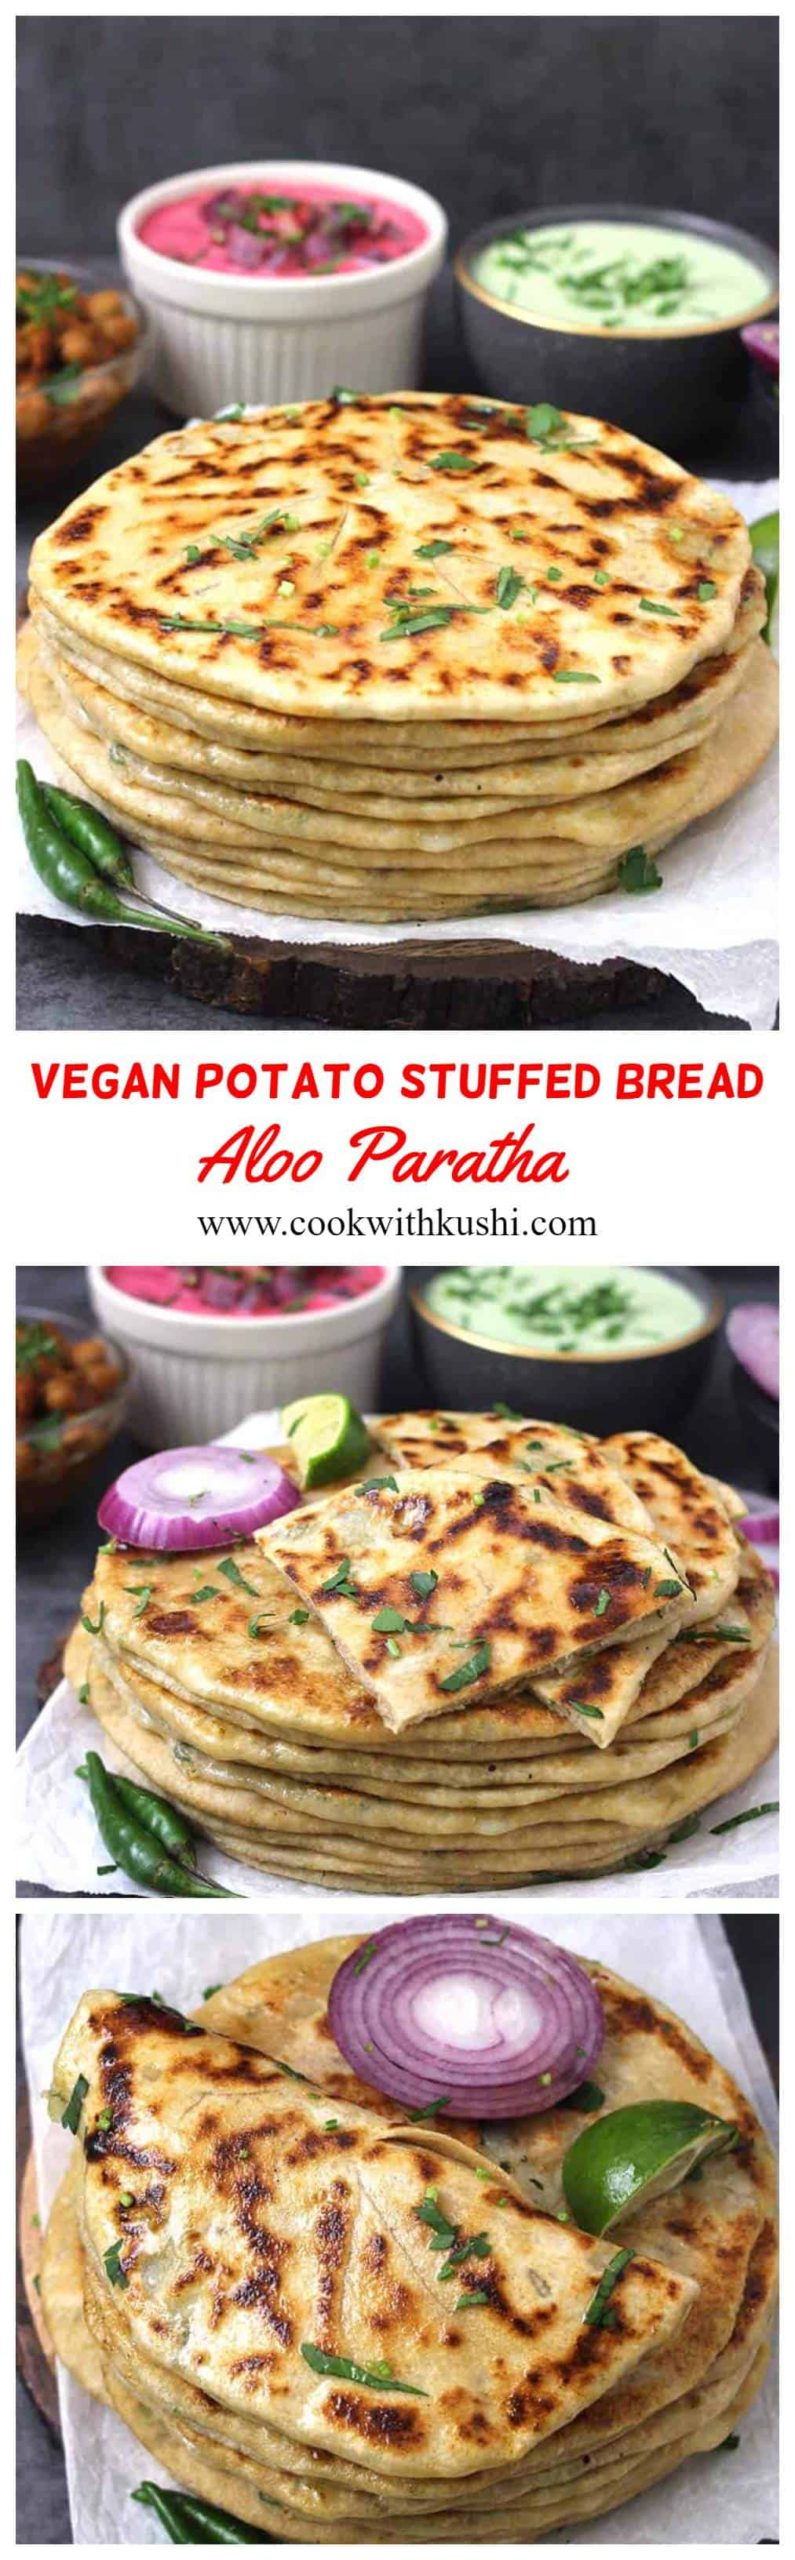 Aloo Paratha is a delicious and popular Indian stuffed flatbread crispy on the outside with soft and flavorful melt in mouth mashed potato filling on the inside. This recipe is for all bread and potato lovers. #naan #easynaanrecipes #aloonaan #potatonaan #stuffednaan #paratha #parotta #kulcha #indianbread #indianflatbread #veganbread #breadstuffing #breakfastrecipes #roti